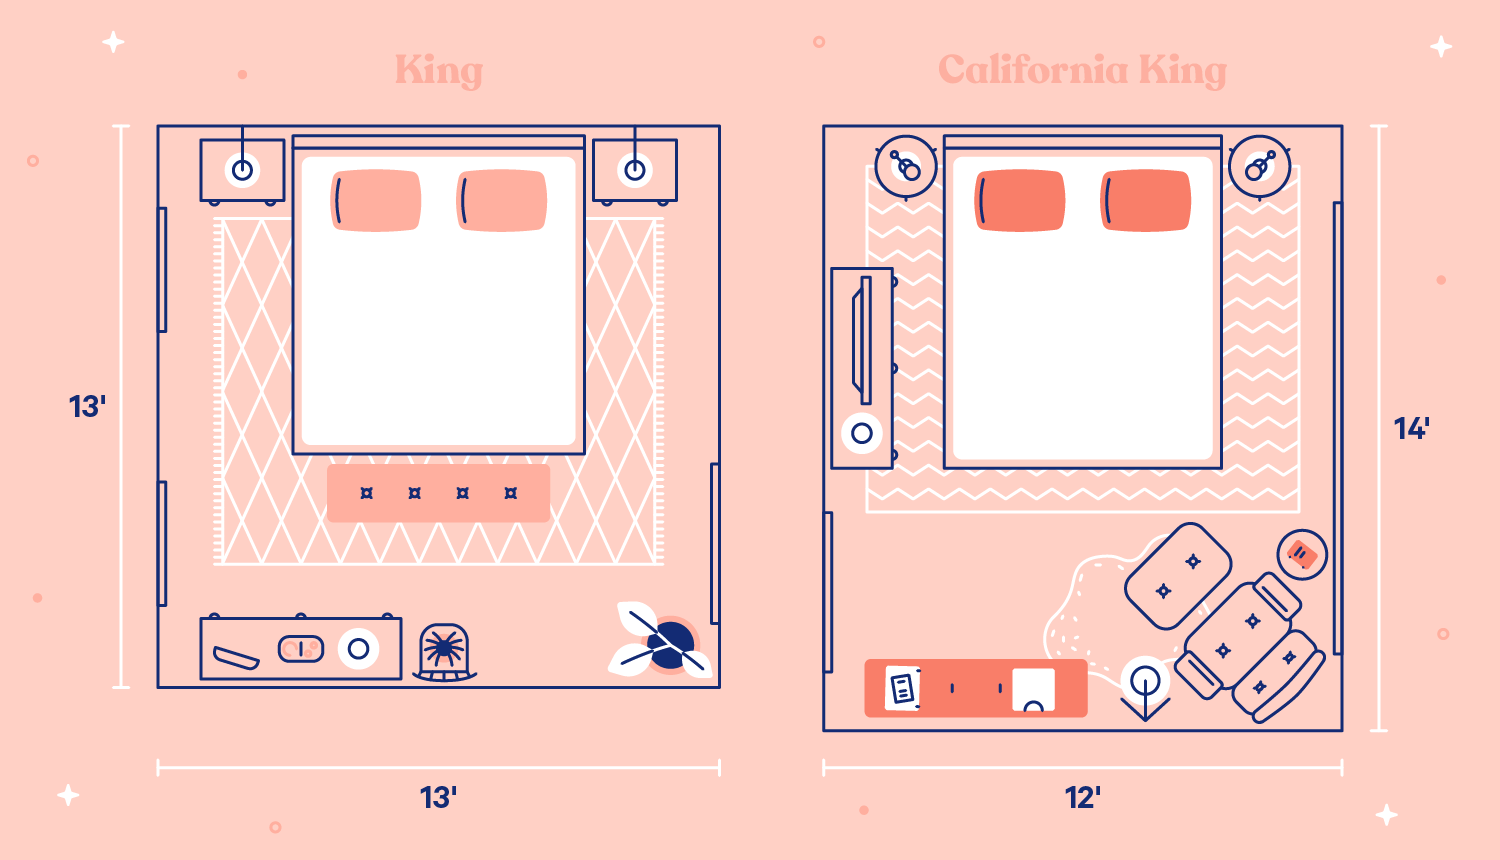 A king and a California king bed in two seprated rooms of the different sizes. Illustration.